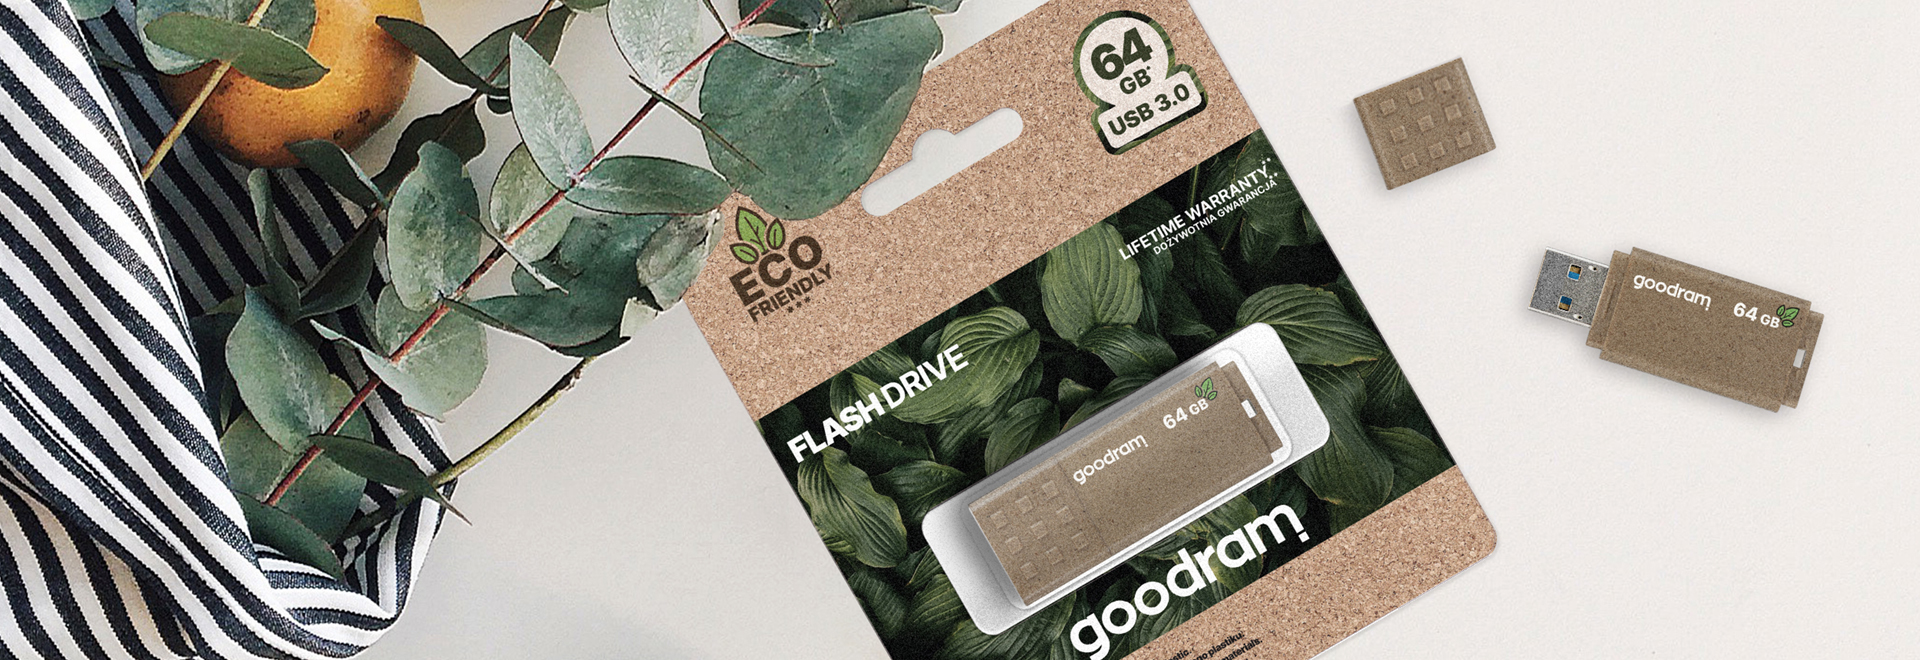 UME ECO FRIENDLY flash drive in retail packaging